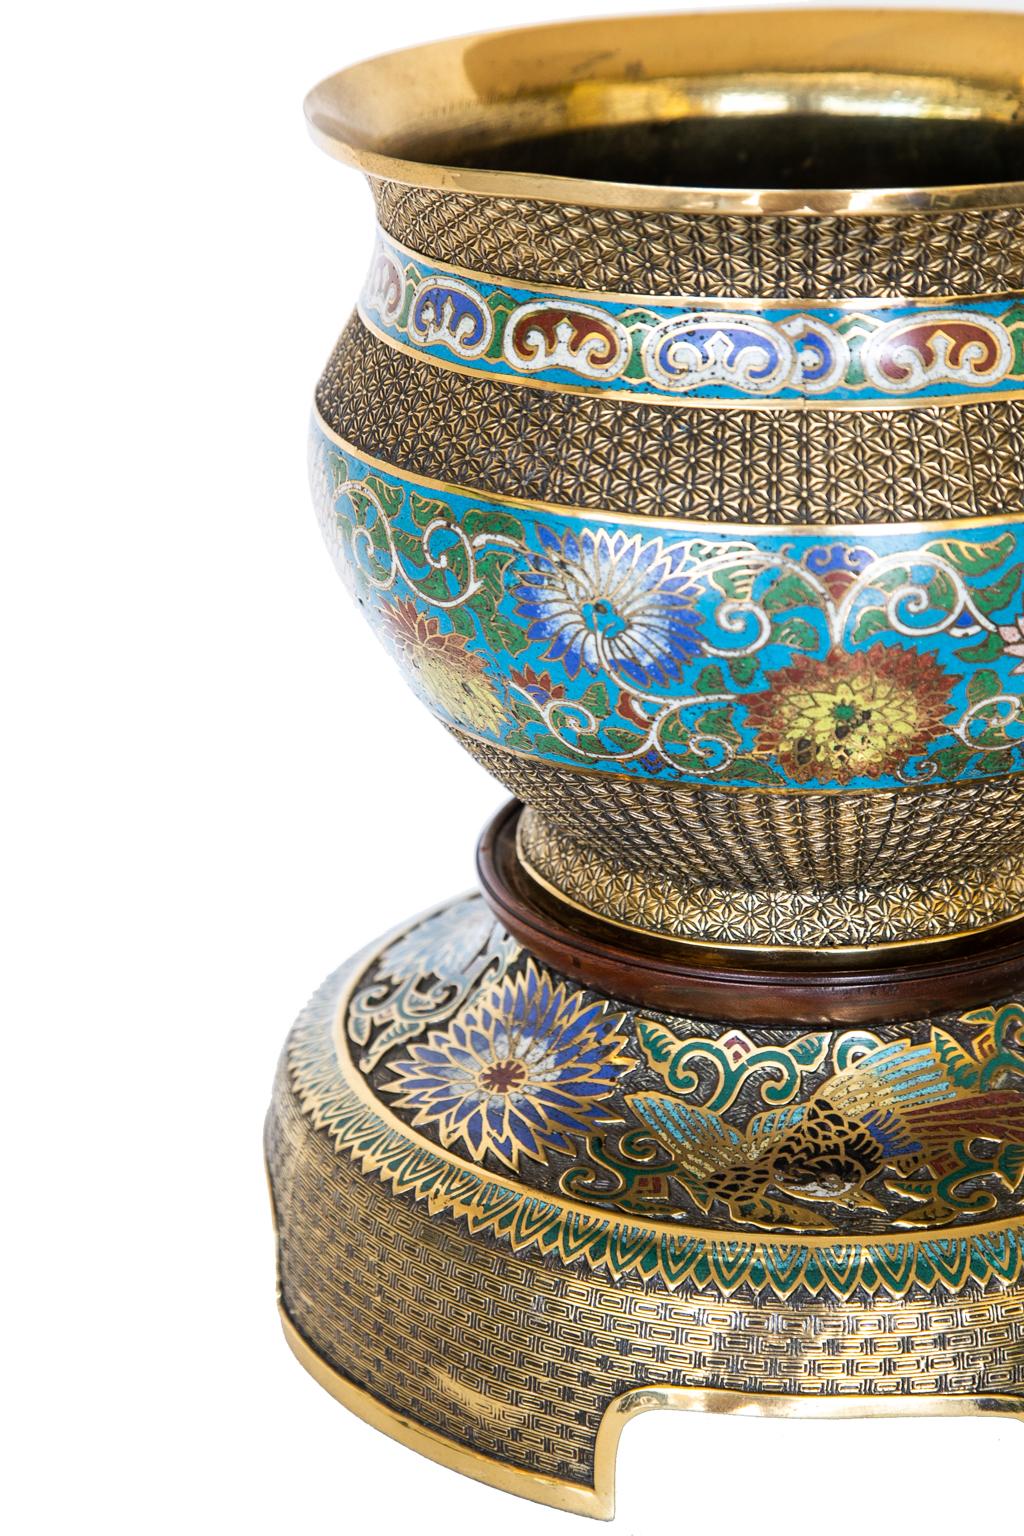 Japanese Champleve’ jardinière on base, with floral motifs in red, white, blue, yellow, and green on this Champleve’ jardiniere. The base has a solid mahogany platform with feet that have arched openings. It is polished and lacquered for easy